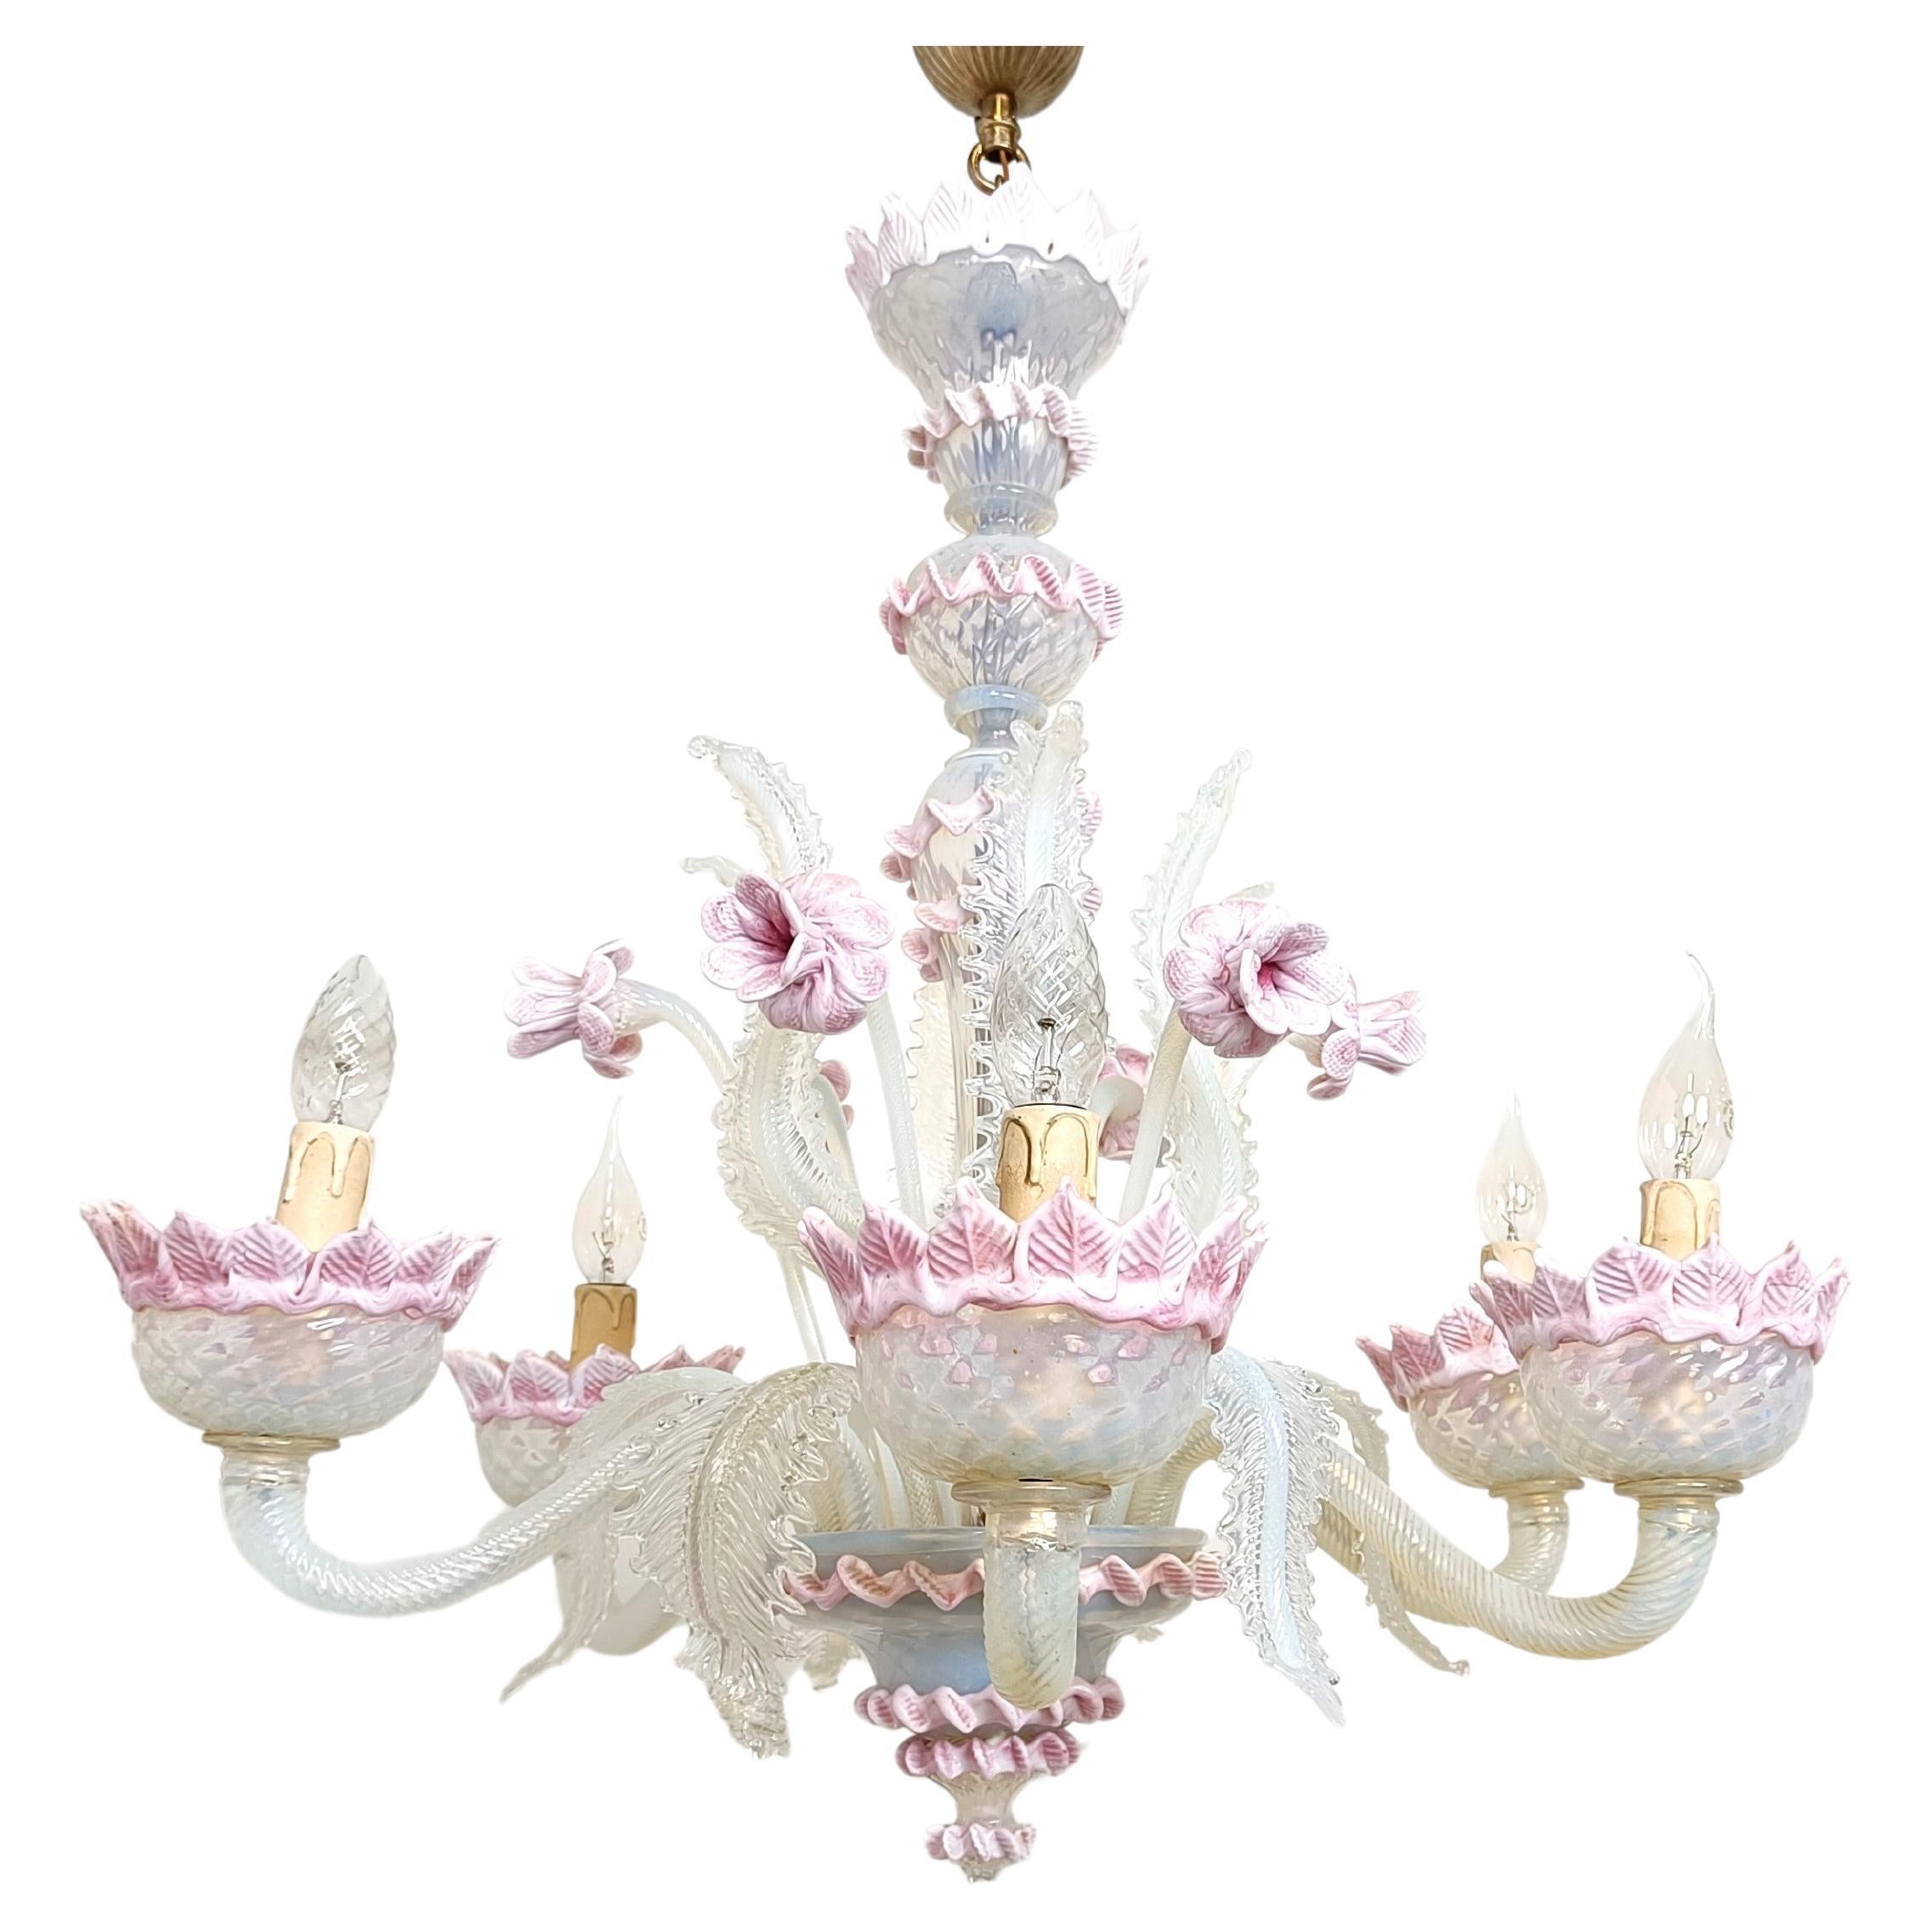 Vintage floral murano glass chandelier, 1950s